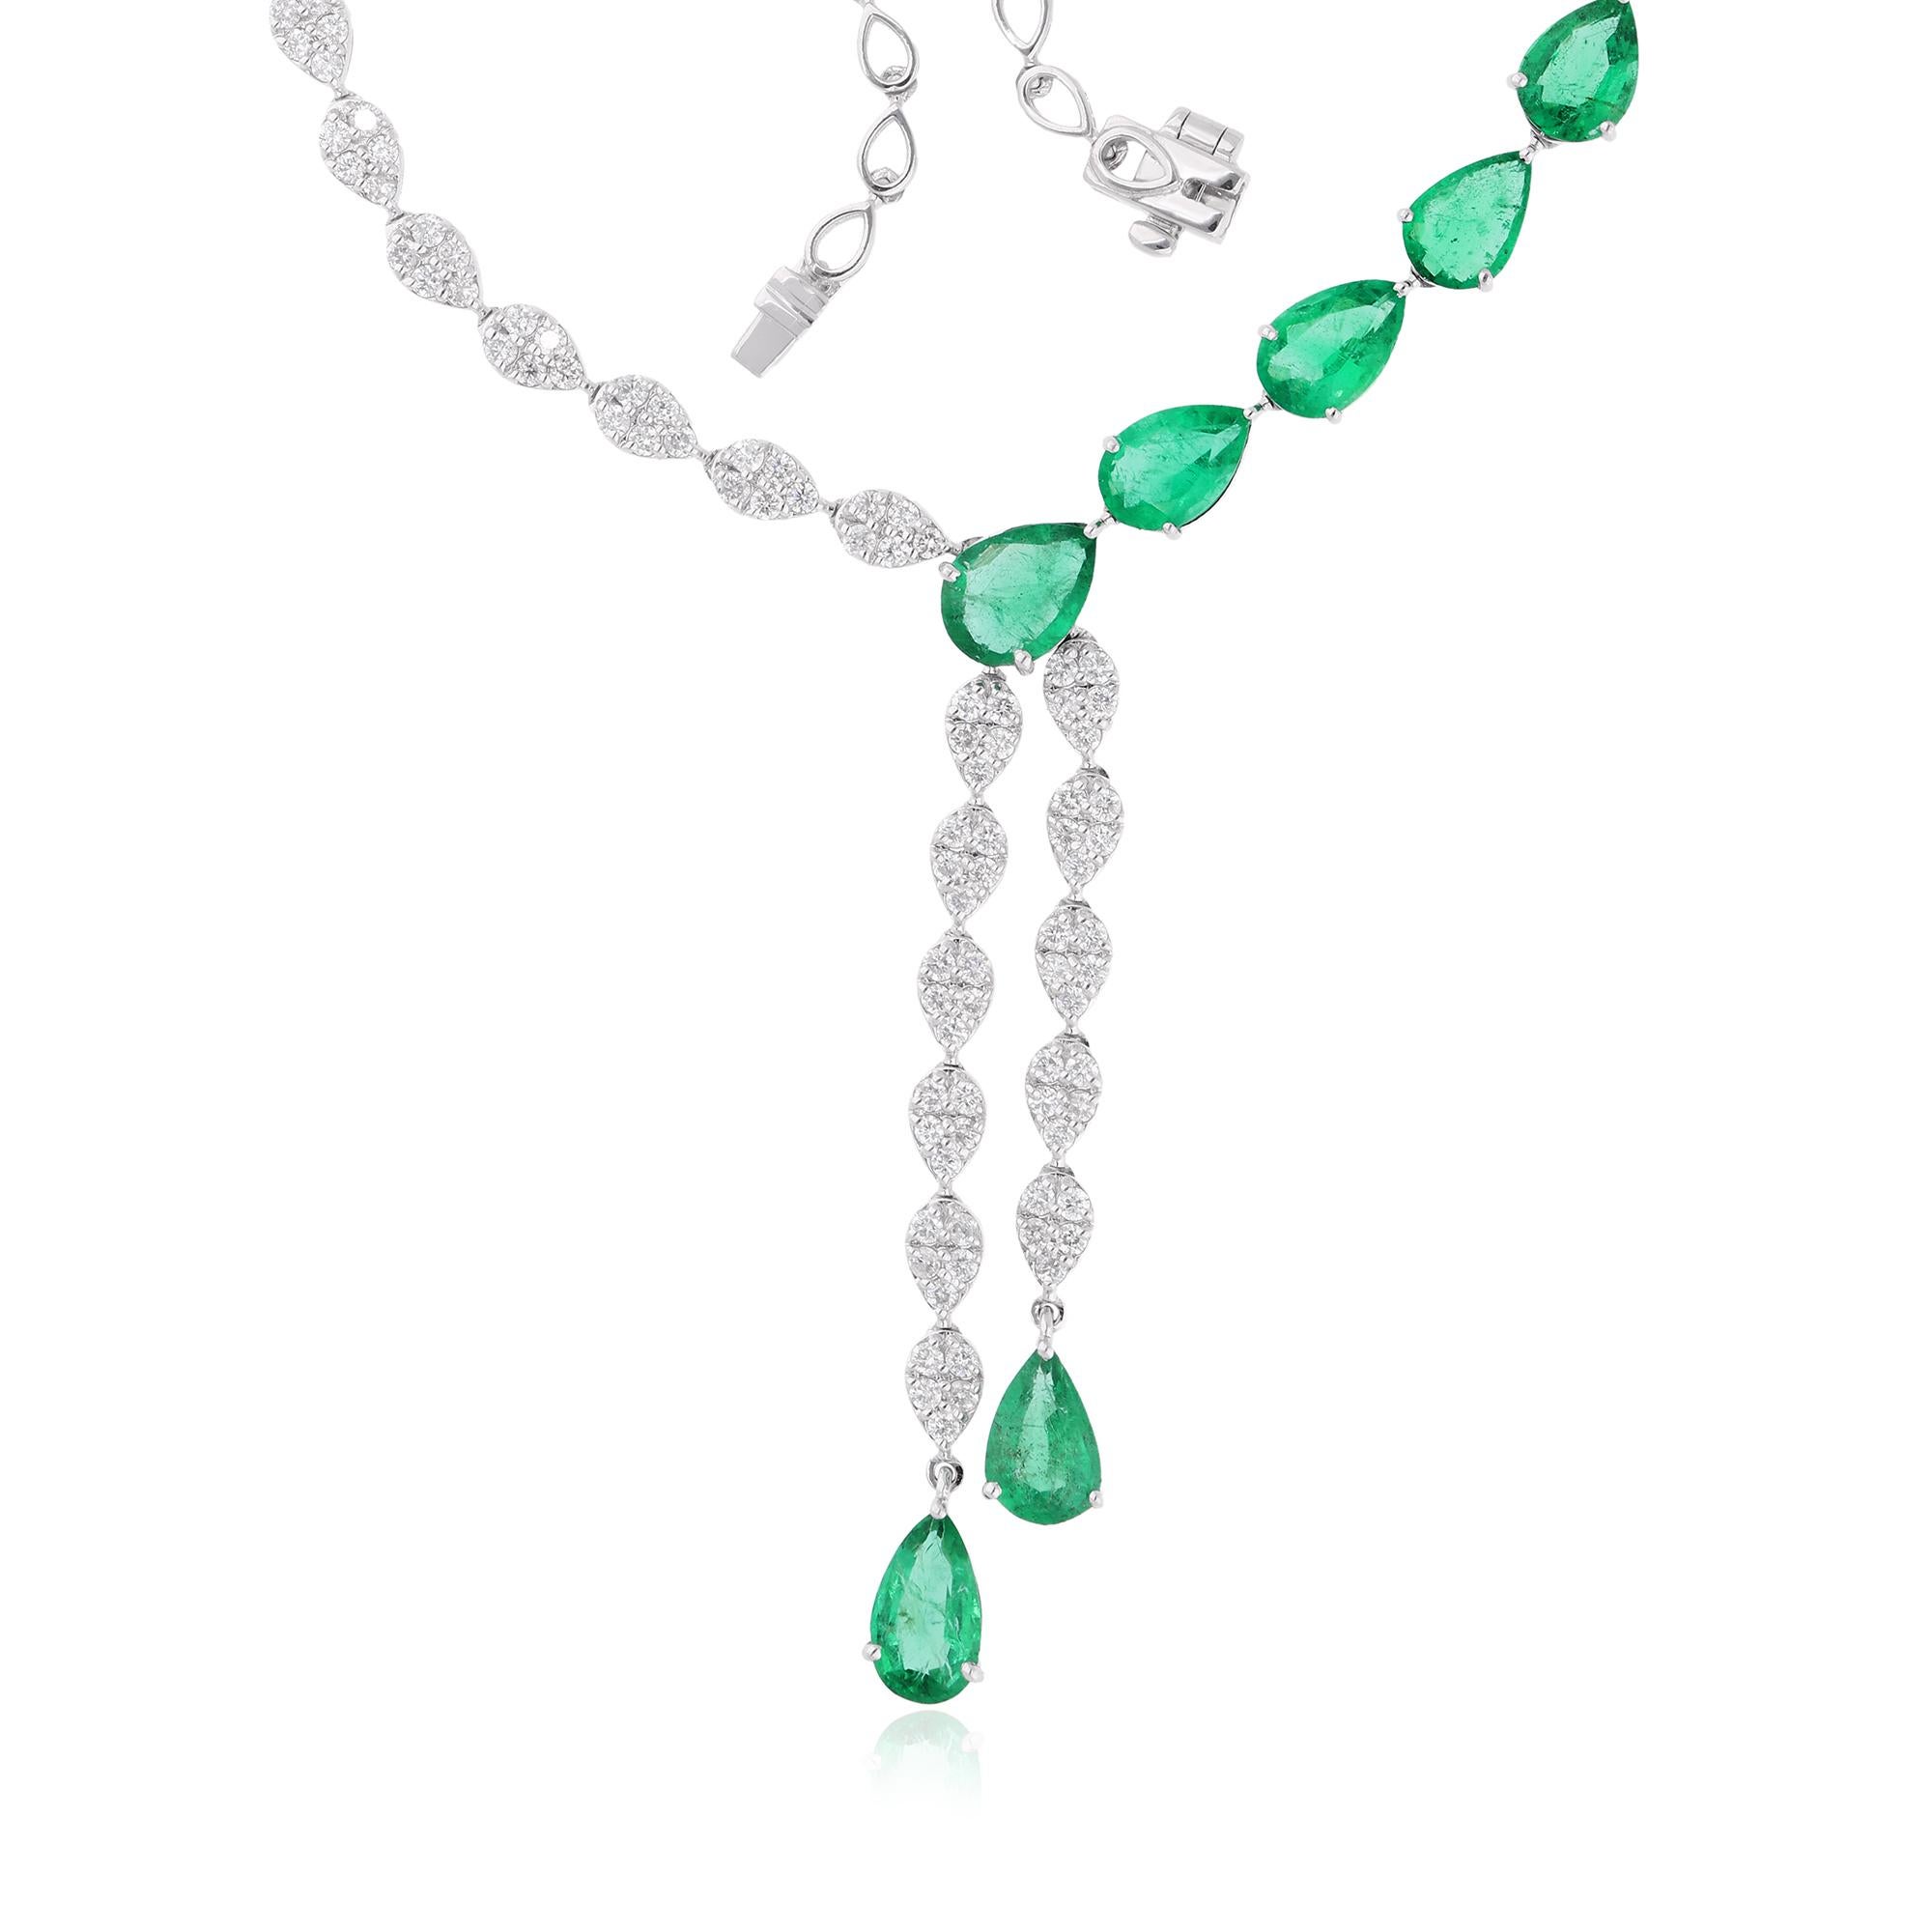 Surrounding the emerald are carefully selected Pear Diamonds, each possessing remarkable brilliance and clarity. Their pear-shaped cut enhances their sparkle, illuminating the necklace with a dazzling radiance that mesmerizes onlookers.

Item Code